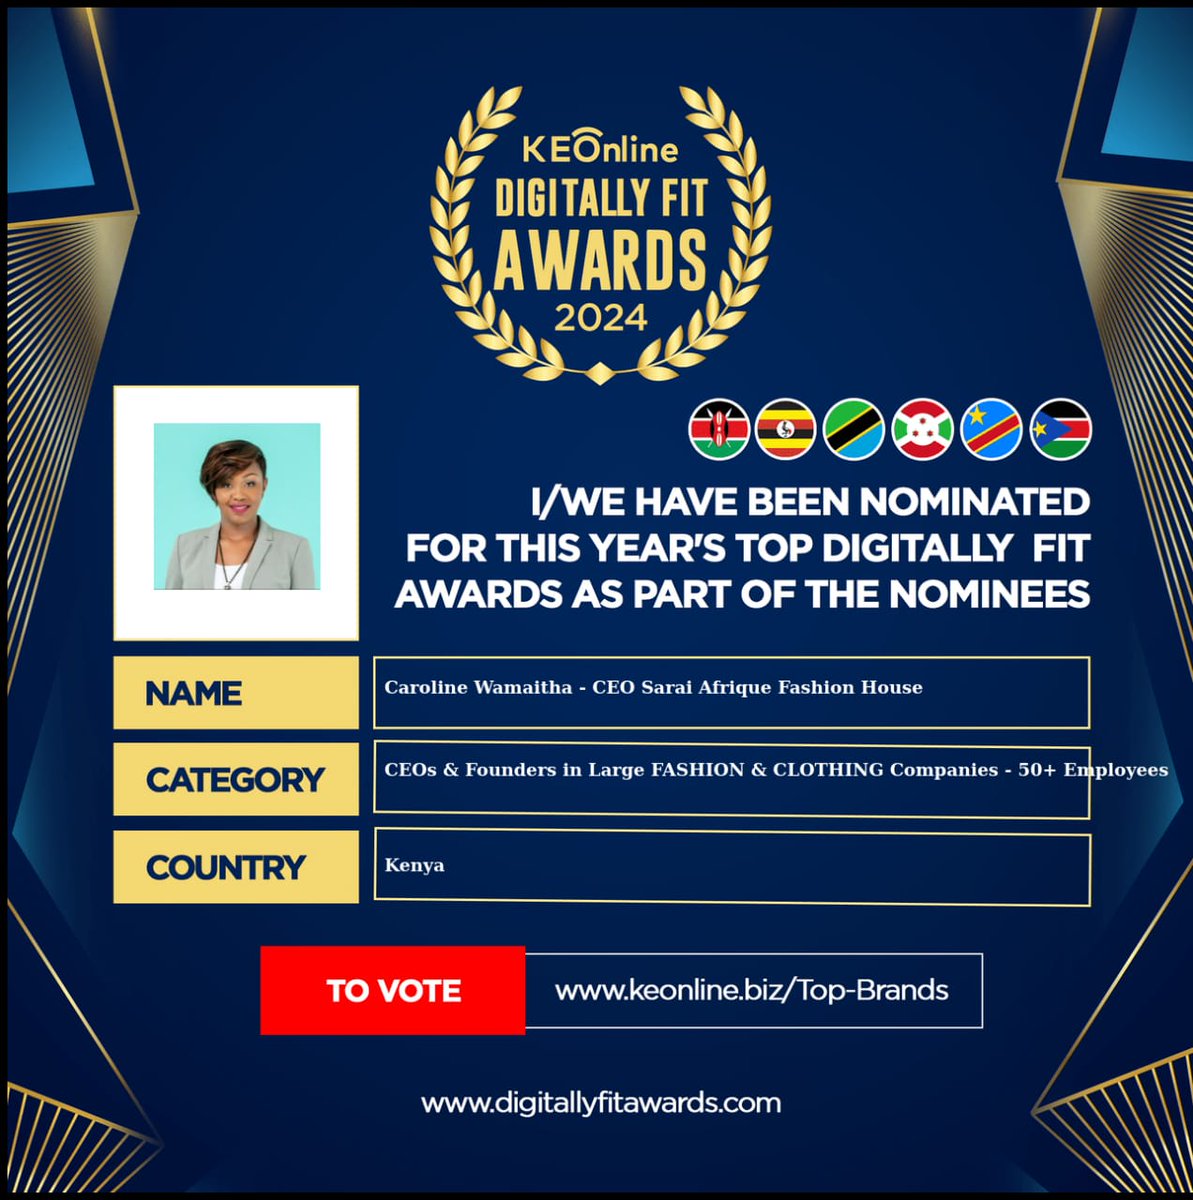 Celebrate sports tech leaders developing smart wearables to enhance athletic performance and training
#DigitallyFitAwardsVote2024
Person of the Year 
KEONLINE